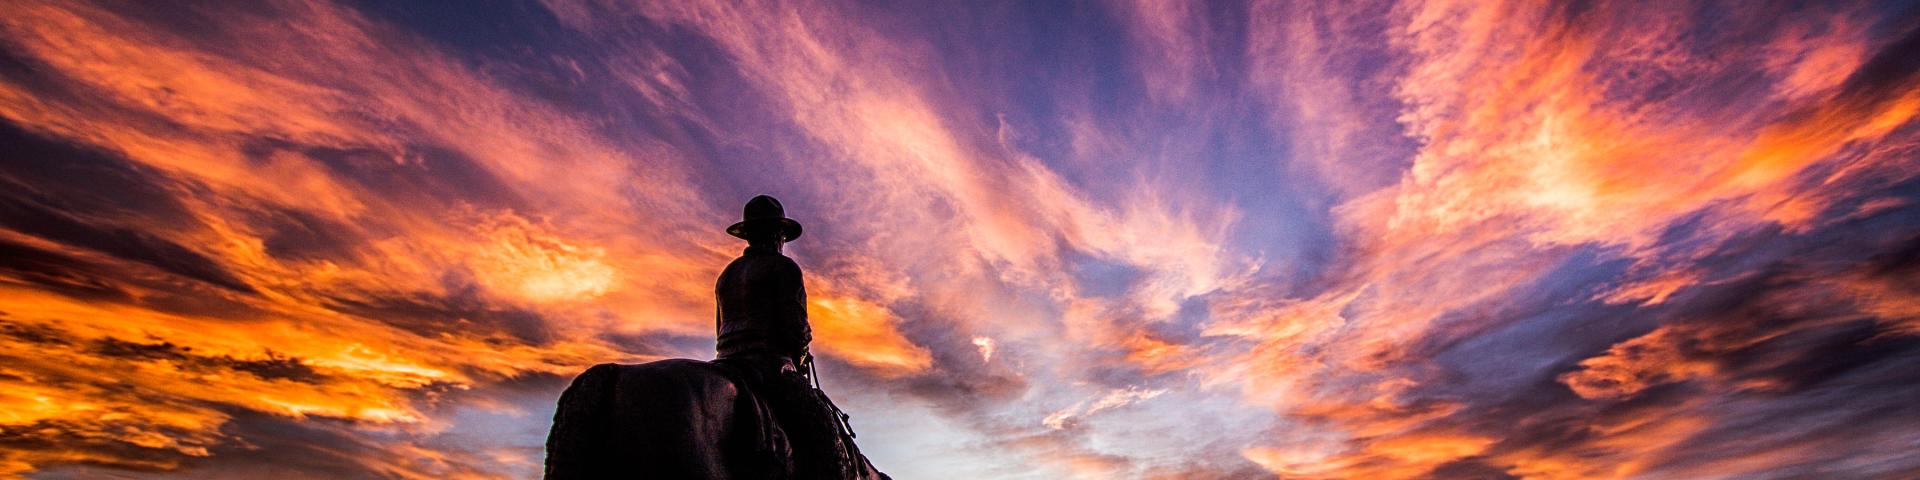 sunset with a statue of a man on a horse